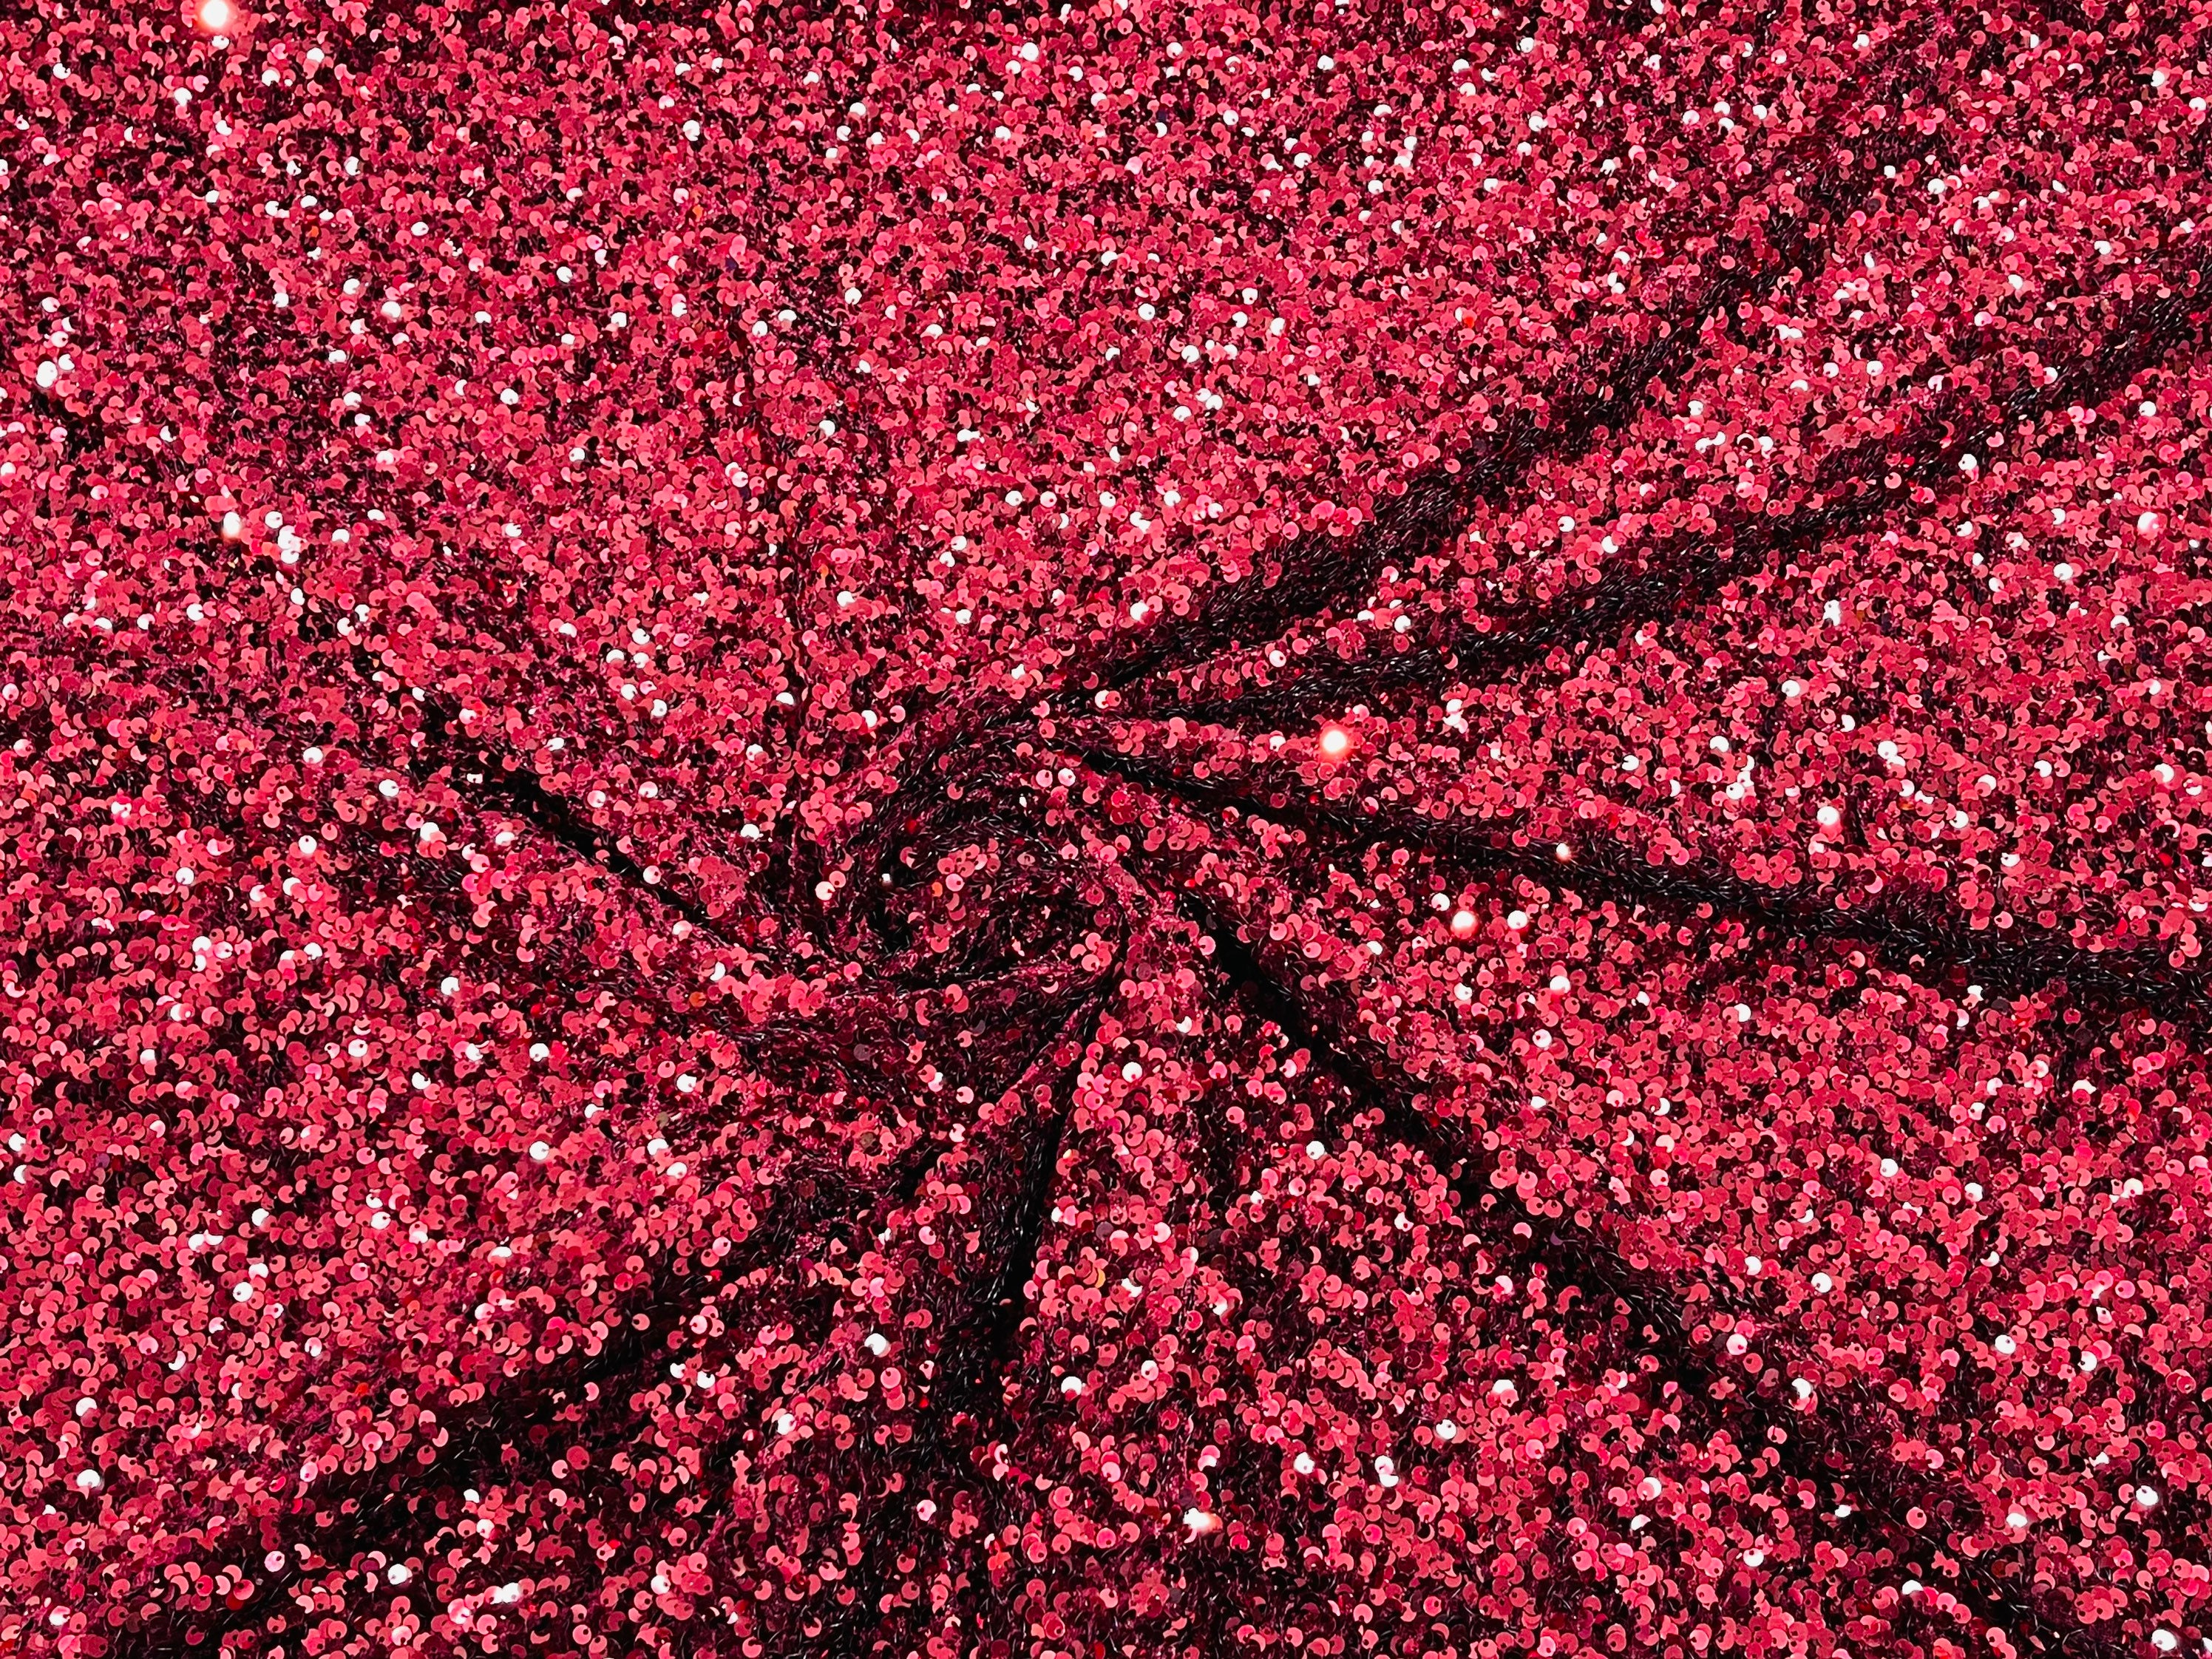 Burgundy Sequin Fabric on Stretch Velvet all Over 5mm Sequins Velvet 2-way Stretch 58/60” by the yard